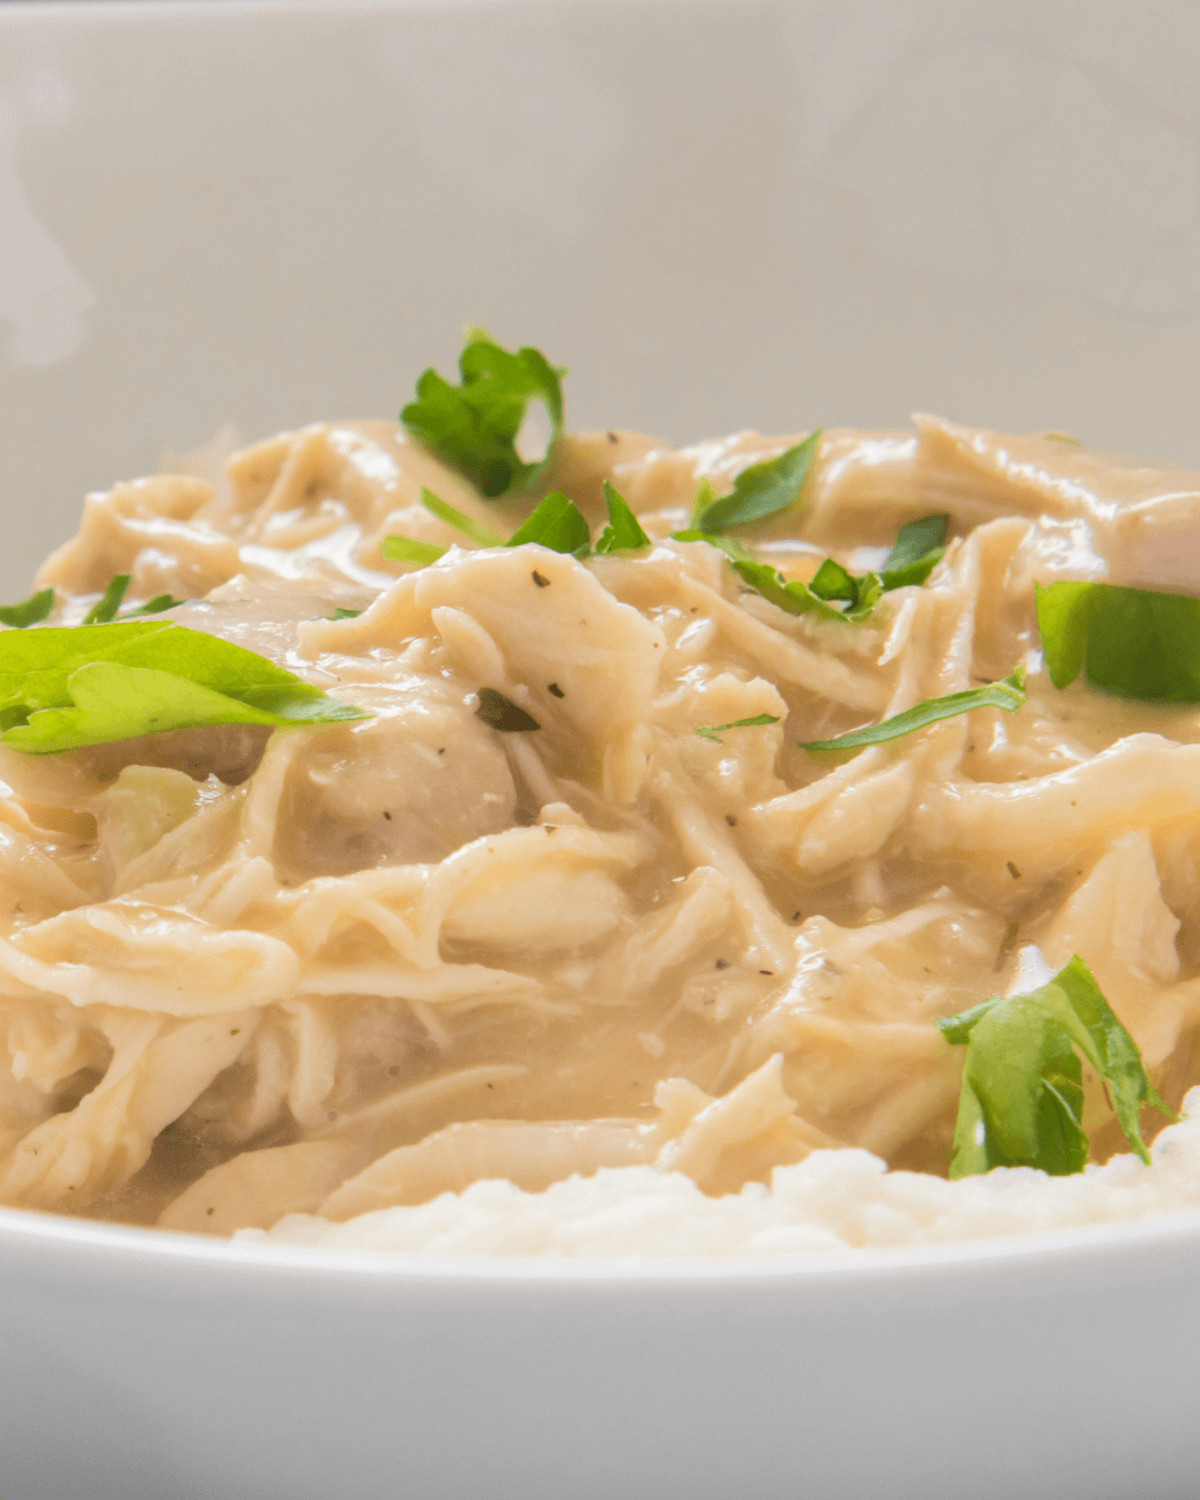 A traditional shredded chicken with gravy over mashed potatoes.